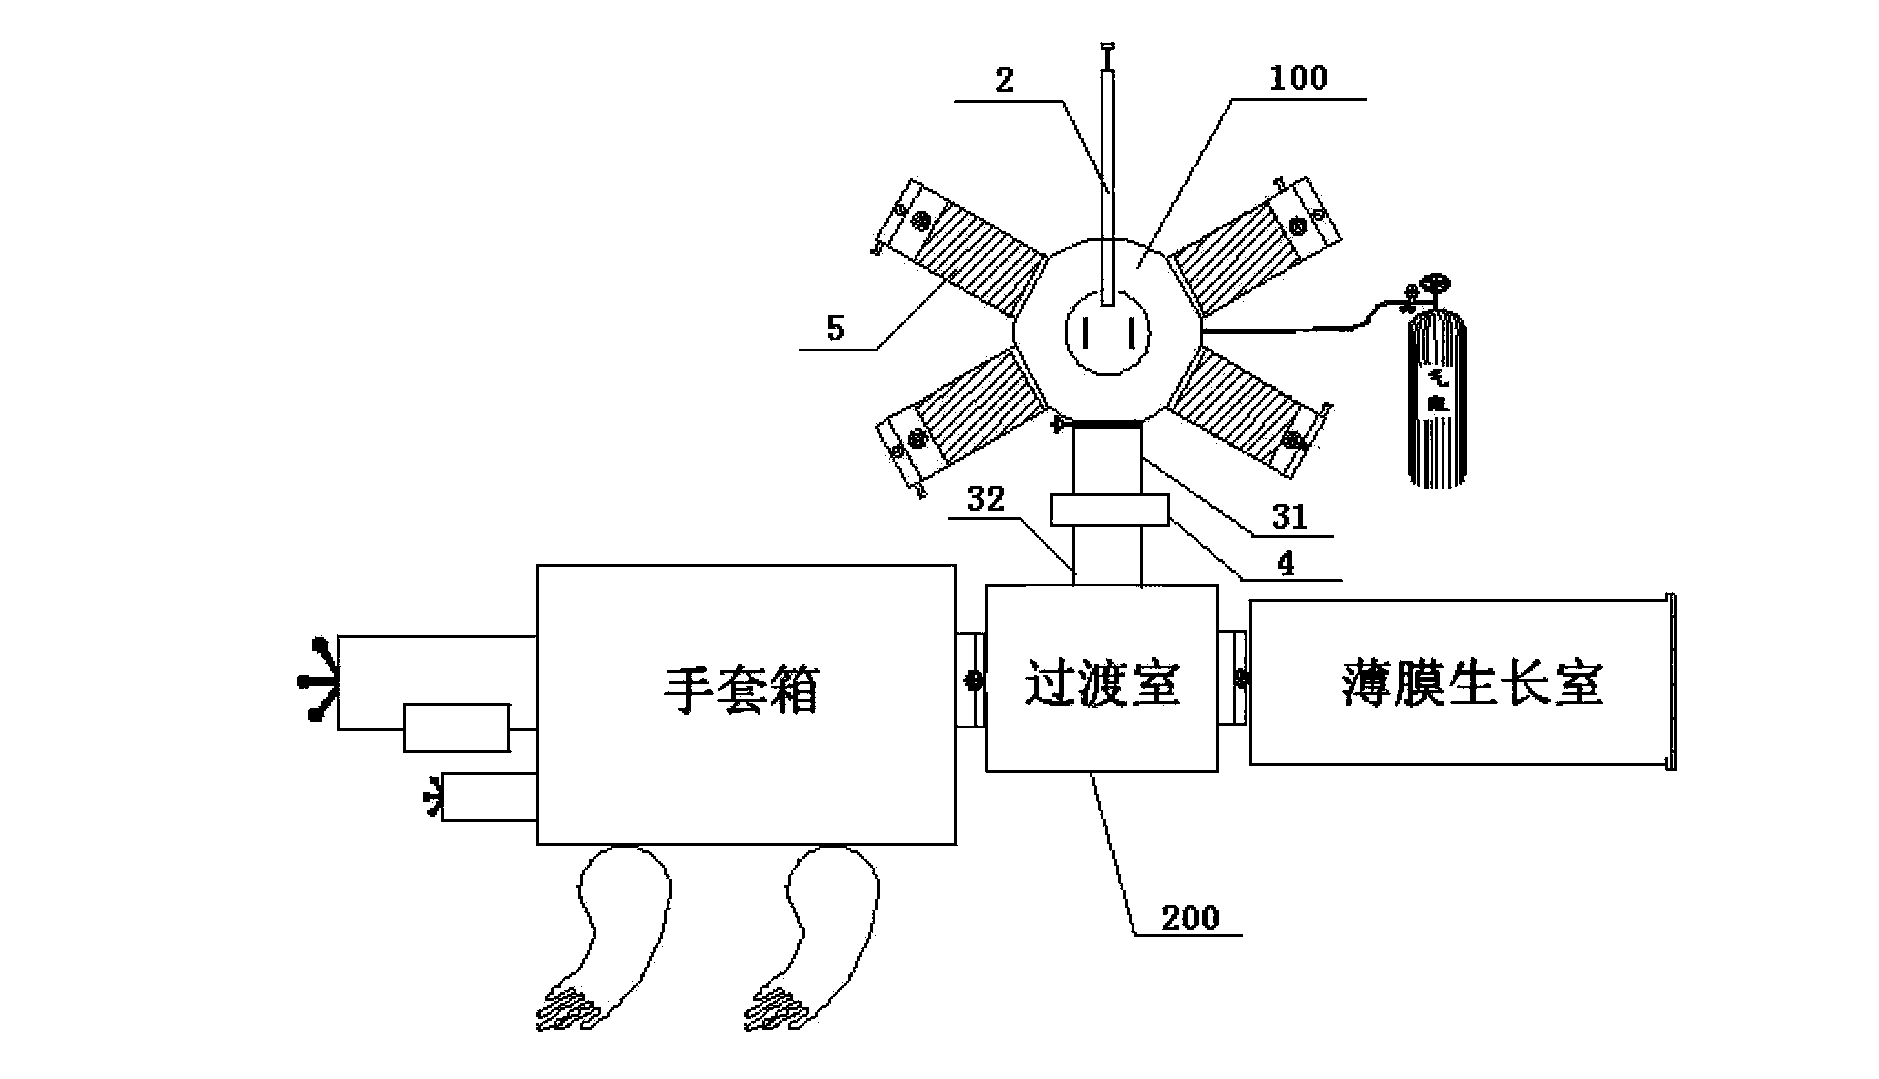 Probe bench, and organic thin-film device preparation and test integrated system and method